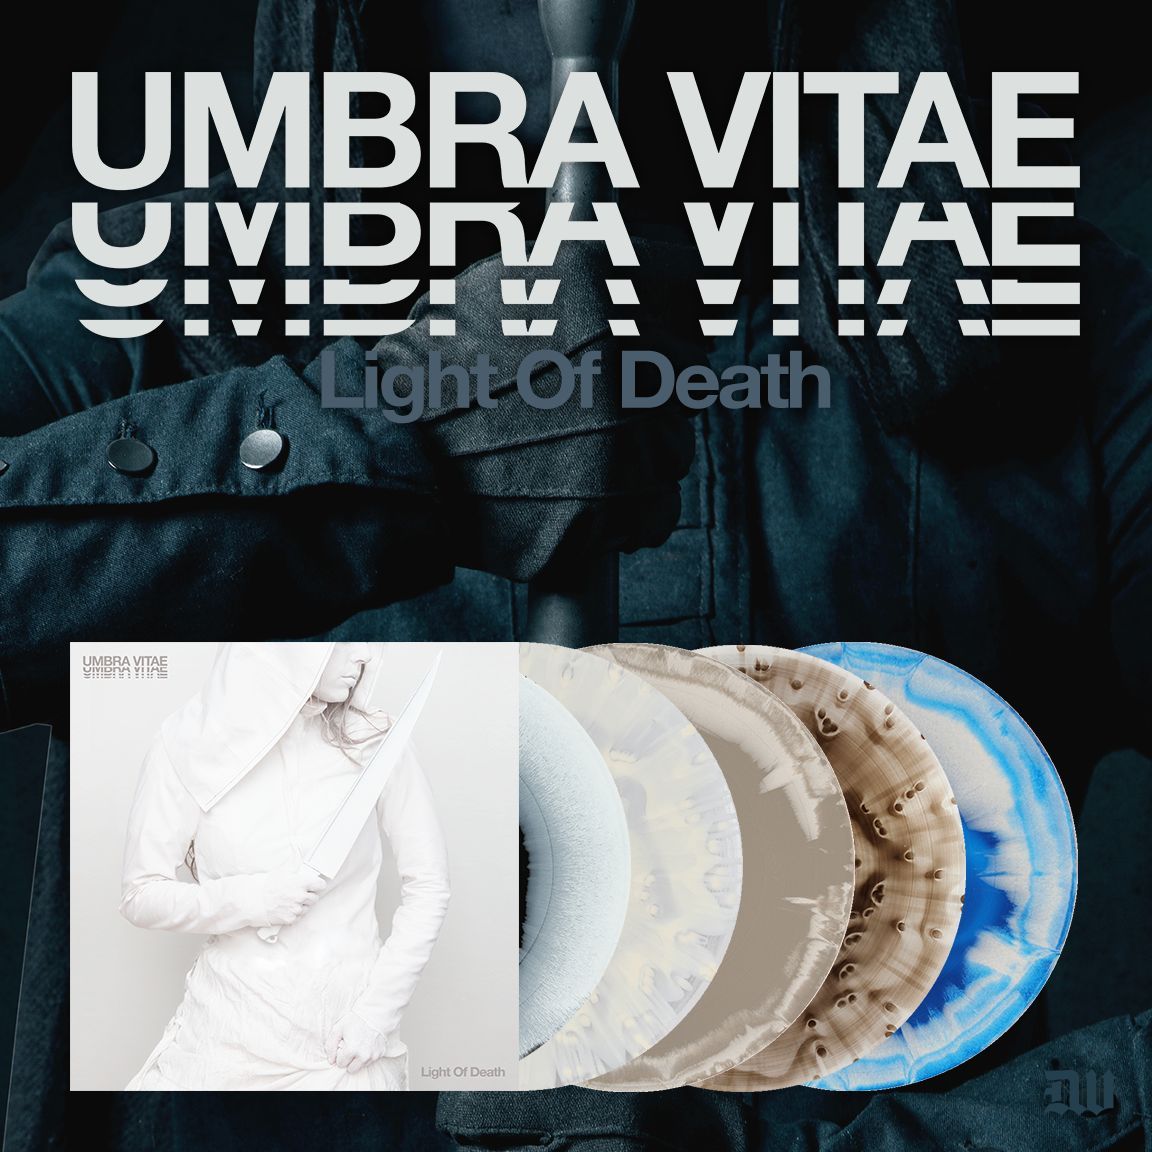 Umbra Vitae 'Light Of Death' out June 7th Listen to 'Belief Is Obsolete' and pre-order now 🔪 umbravitae.com #UmbraVitae #LightOfDeath #DeathwishInc